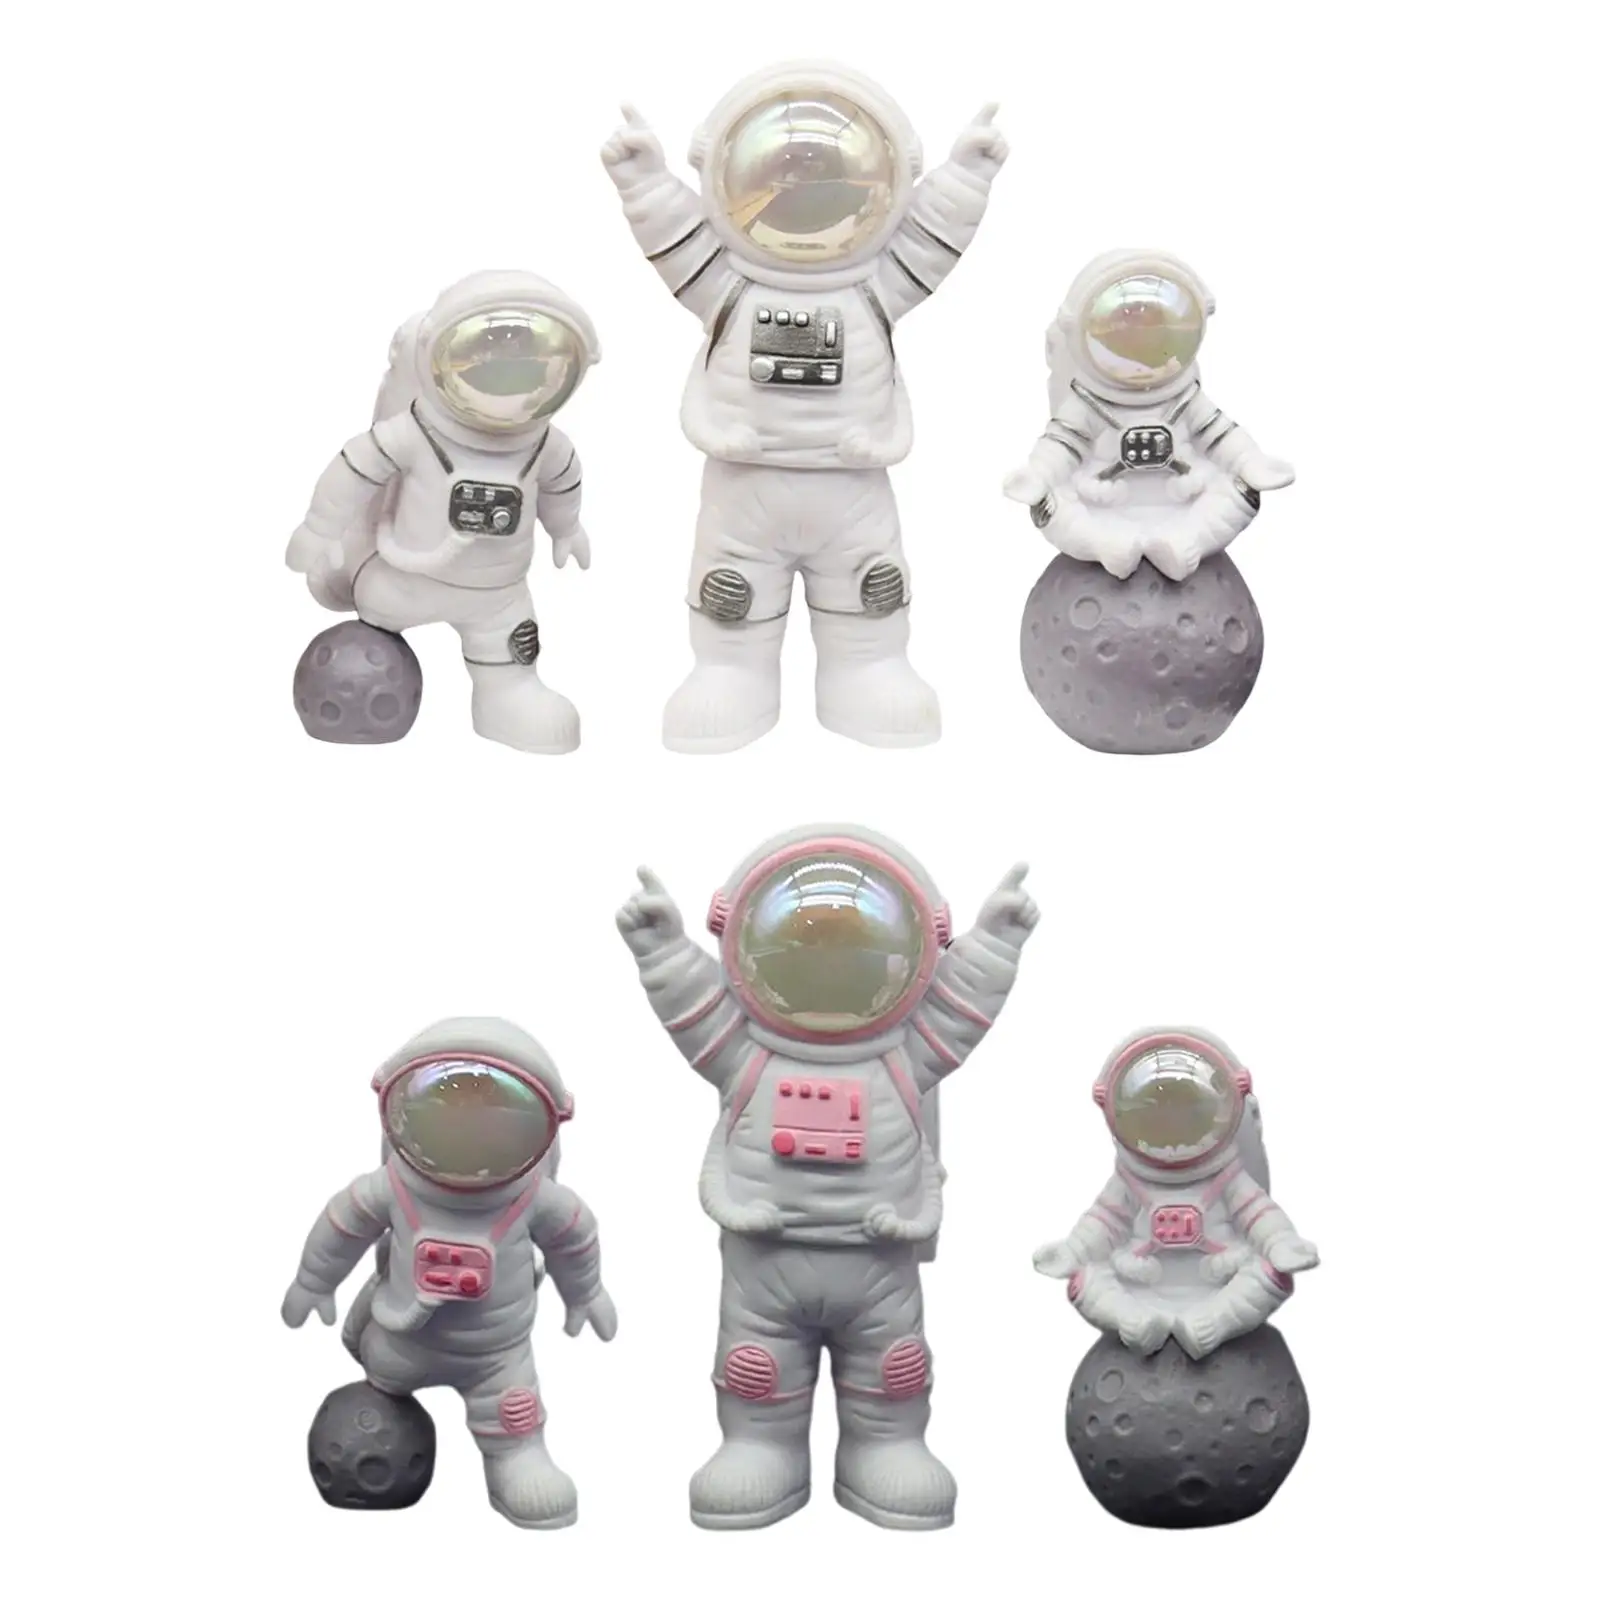 

3 Pieces Cute Astronaut Statues Spaceman Ornaments Cake Toppers Toys Figurines for Decoration Crafts Arts Desktop Accessories